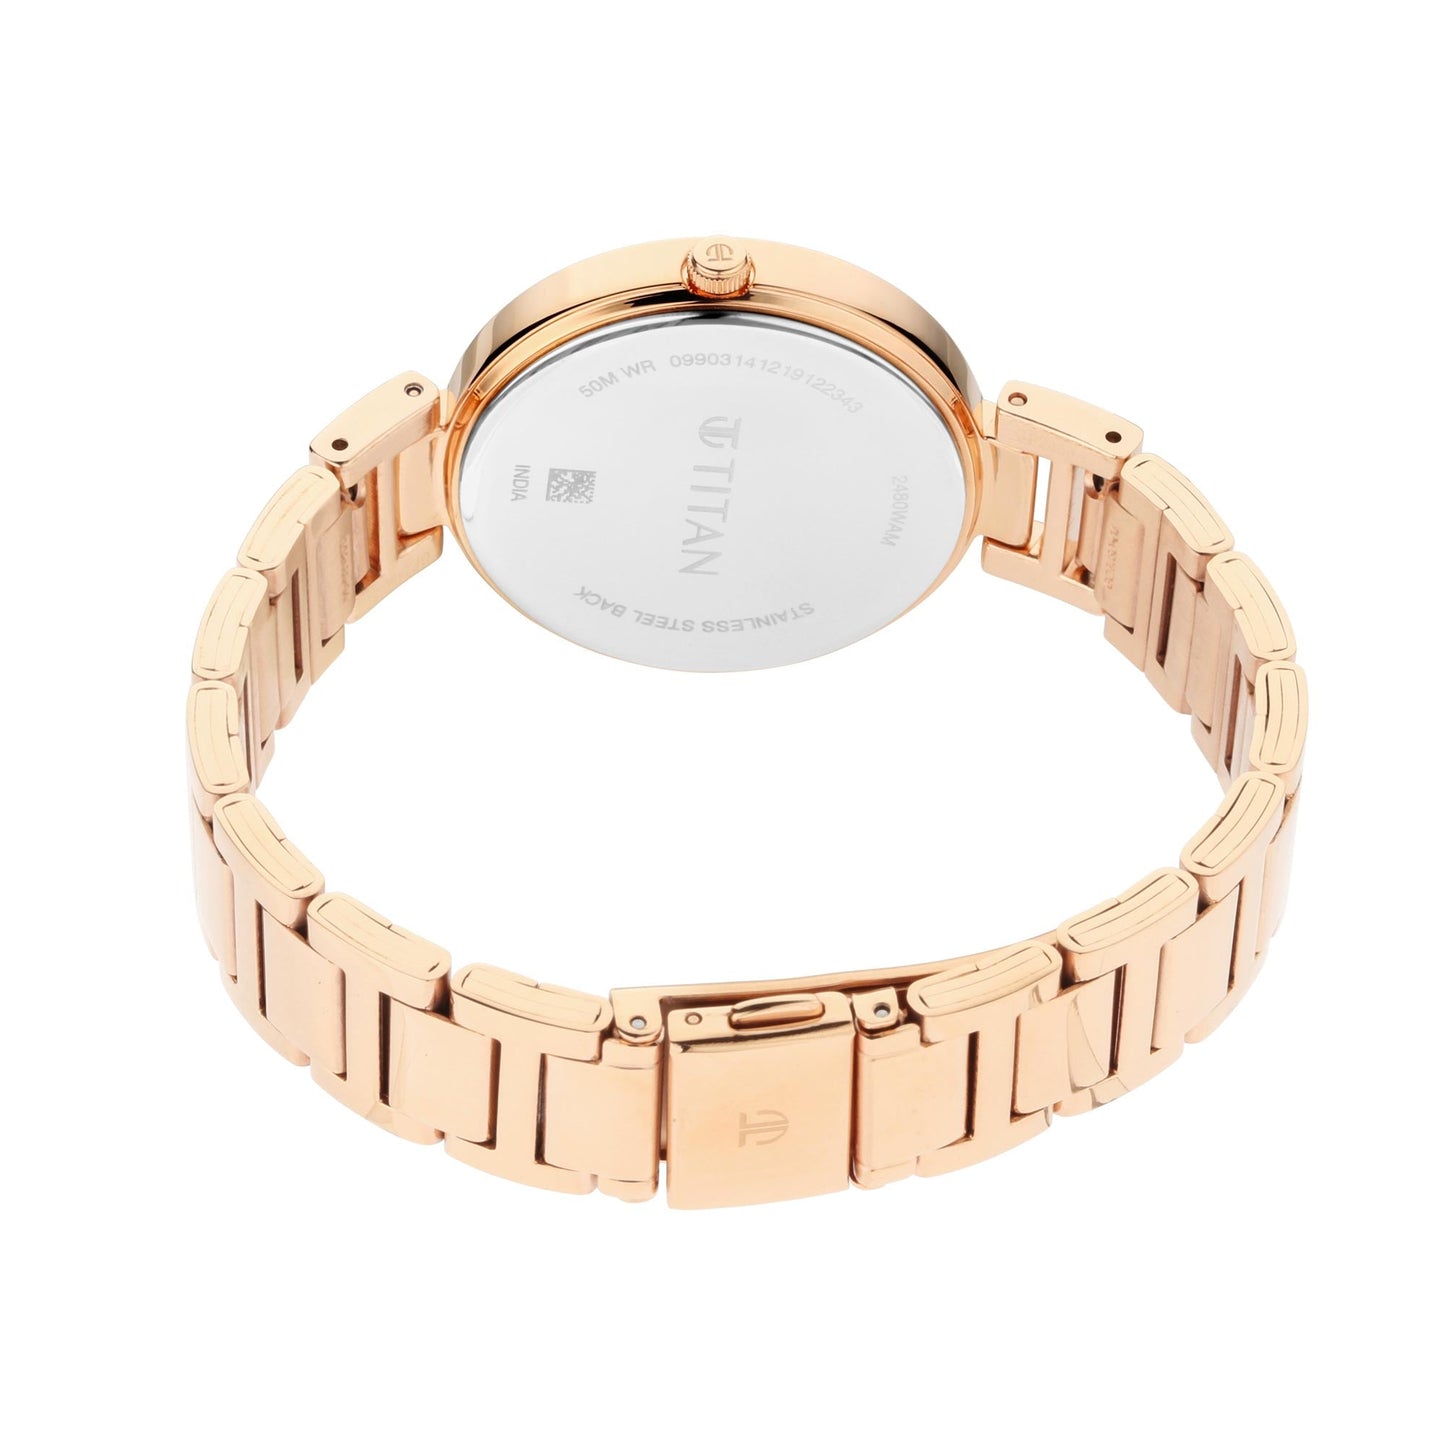 Titan Sparkle Rose Gold Dial Analog with Date Metal Strap watch for Women